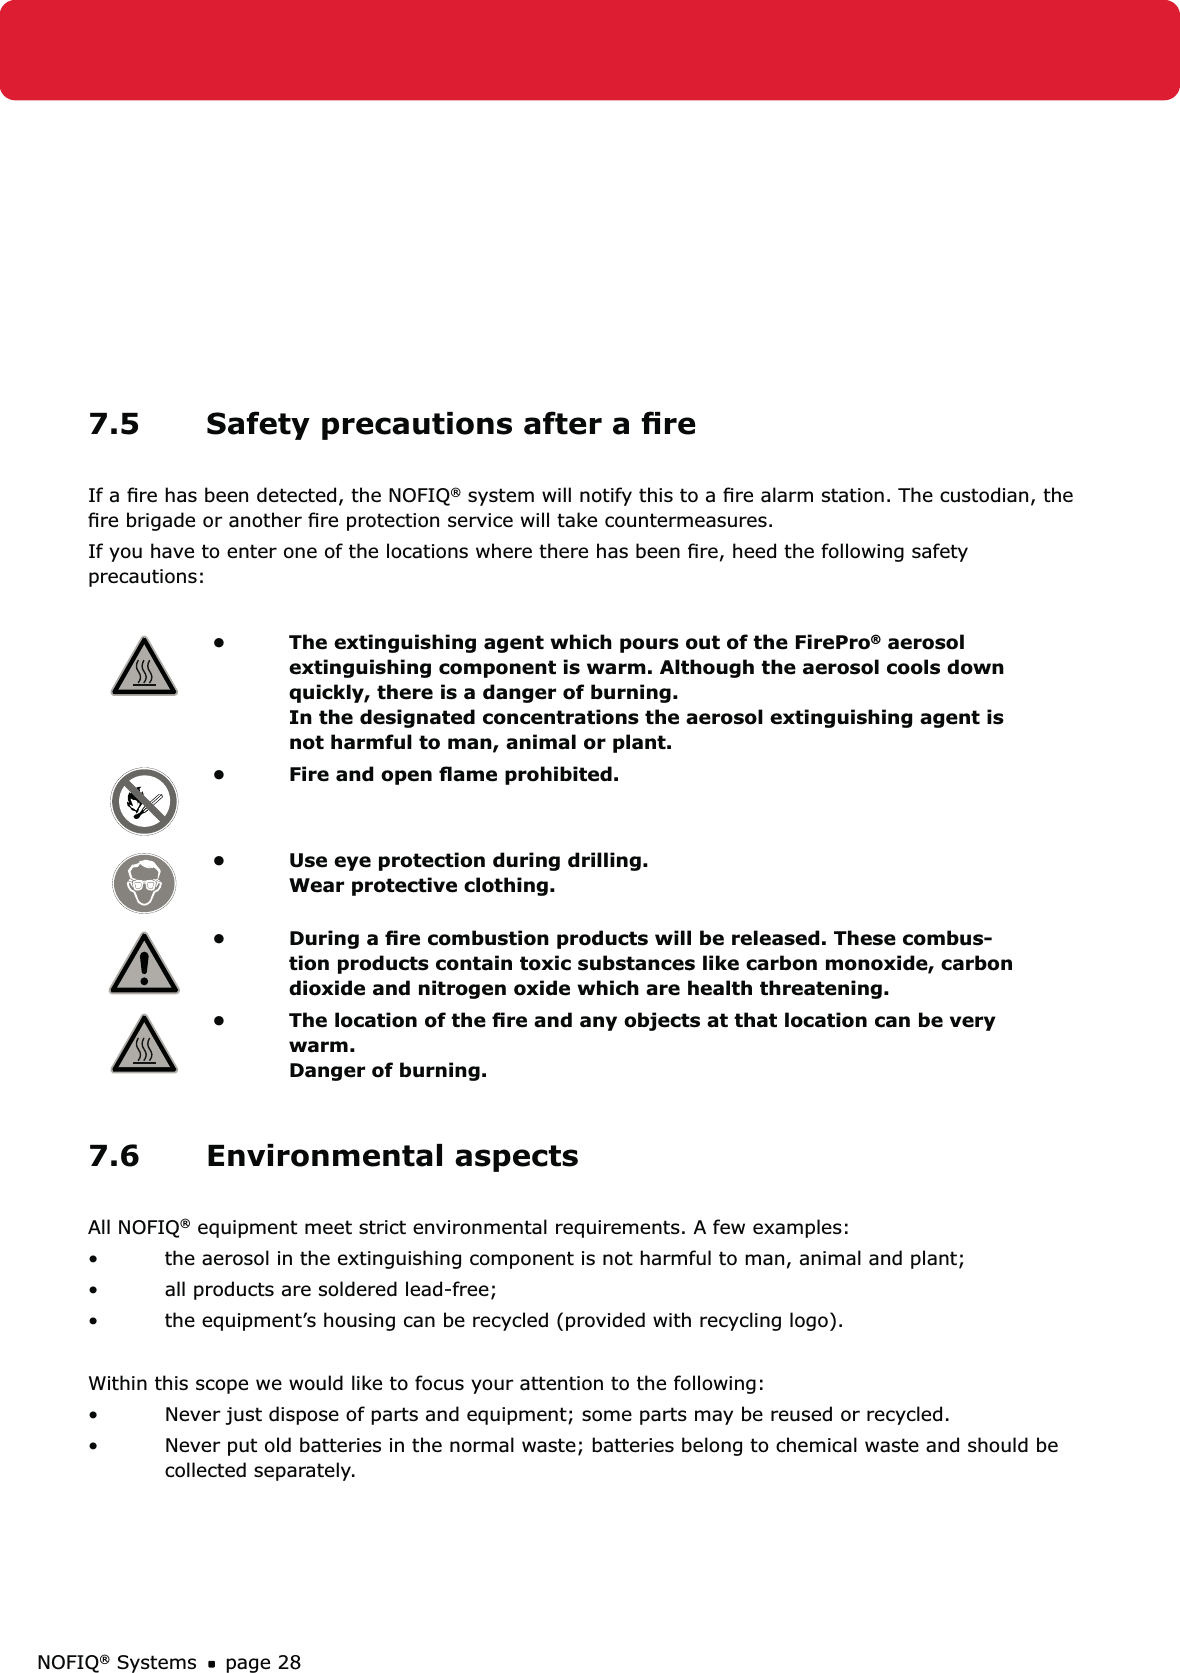 NOFIQ® Systems page 287.5  Safety precautions after a ﬁre If a ﬁre has been detected, the NOFIQ® system will notify this to a ﬁre alarm station. The custodian, the ﬁre brigade or another ﬁre protection service will take countermeasures.If you have to enter one of the locations where there has been ﬁre, heed the following safety precautions:The extinguishing agent which pours out of the FirePro•  ® aerosol extinguishing component is warm. Although the aerosol cools down quickly, there is a danger of burning. In the designated concentrations the aerosol extinguishing agent is not harmful to man, animal or plant.Fire and open ﬂame prohibited.• Use eye protection during drilling. • Wear protective clothing.During a ﬁre combustion products will be released. These combus-• tion products contain toxic substances like carbon monoxide, carbon dioxide and nitrogen oxide which are health threatening.The location of the ﬁre and any objects at that location can be very • warm.  Danger of burning. 7.6 Environmental aspectsAll NOFIQ® equipment meet strict environmental requirements. A few examples:the aerosol in the extinguishing component is not harmful to man, animal and plant;• all products are soldered lead-free;• the equipment’s housing can be recycled (provided with recycling logo).• Within this scope we would like to focus your attention to the following:Never just dispose of parts and equipment; some parts may be reused or recycled.• Never put old batteries in the normal waste; batteries belong to chemical waste and should be • collected separately.